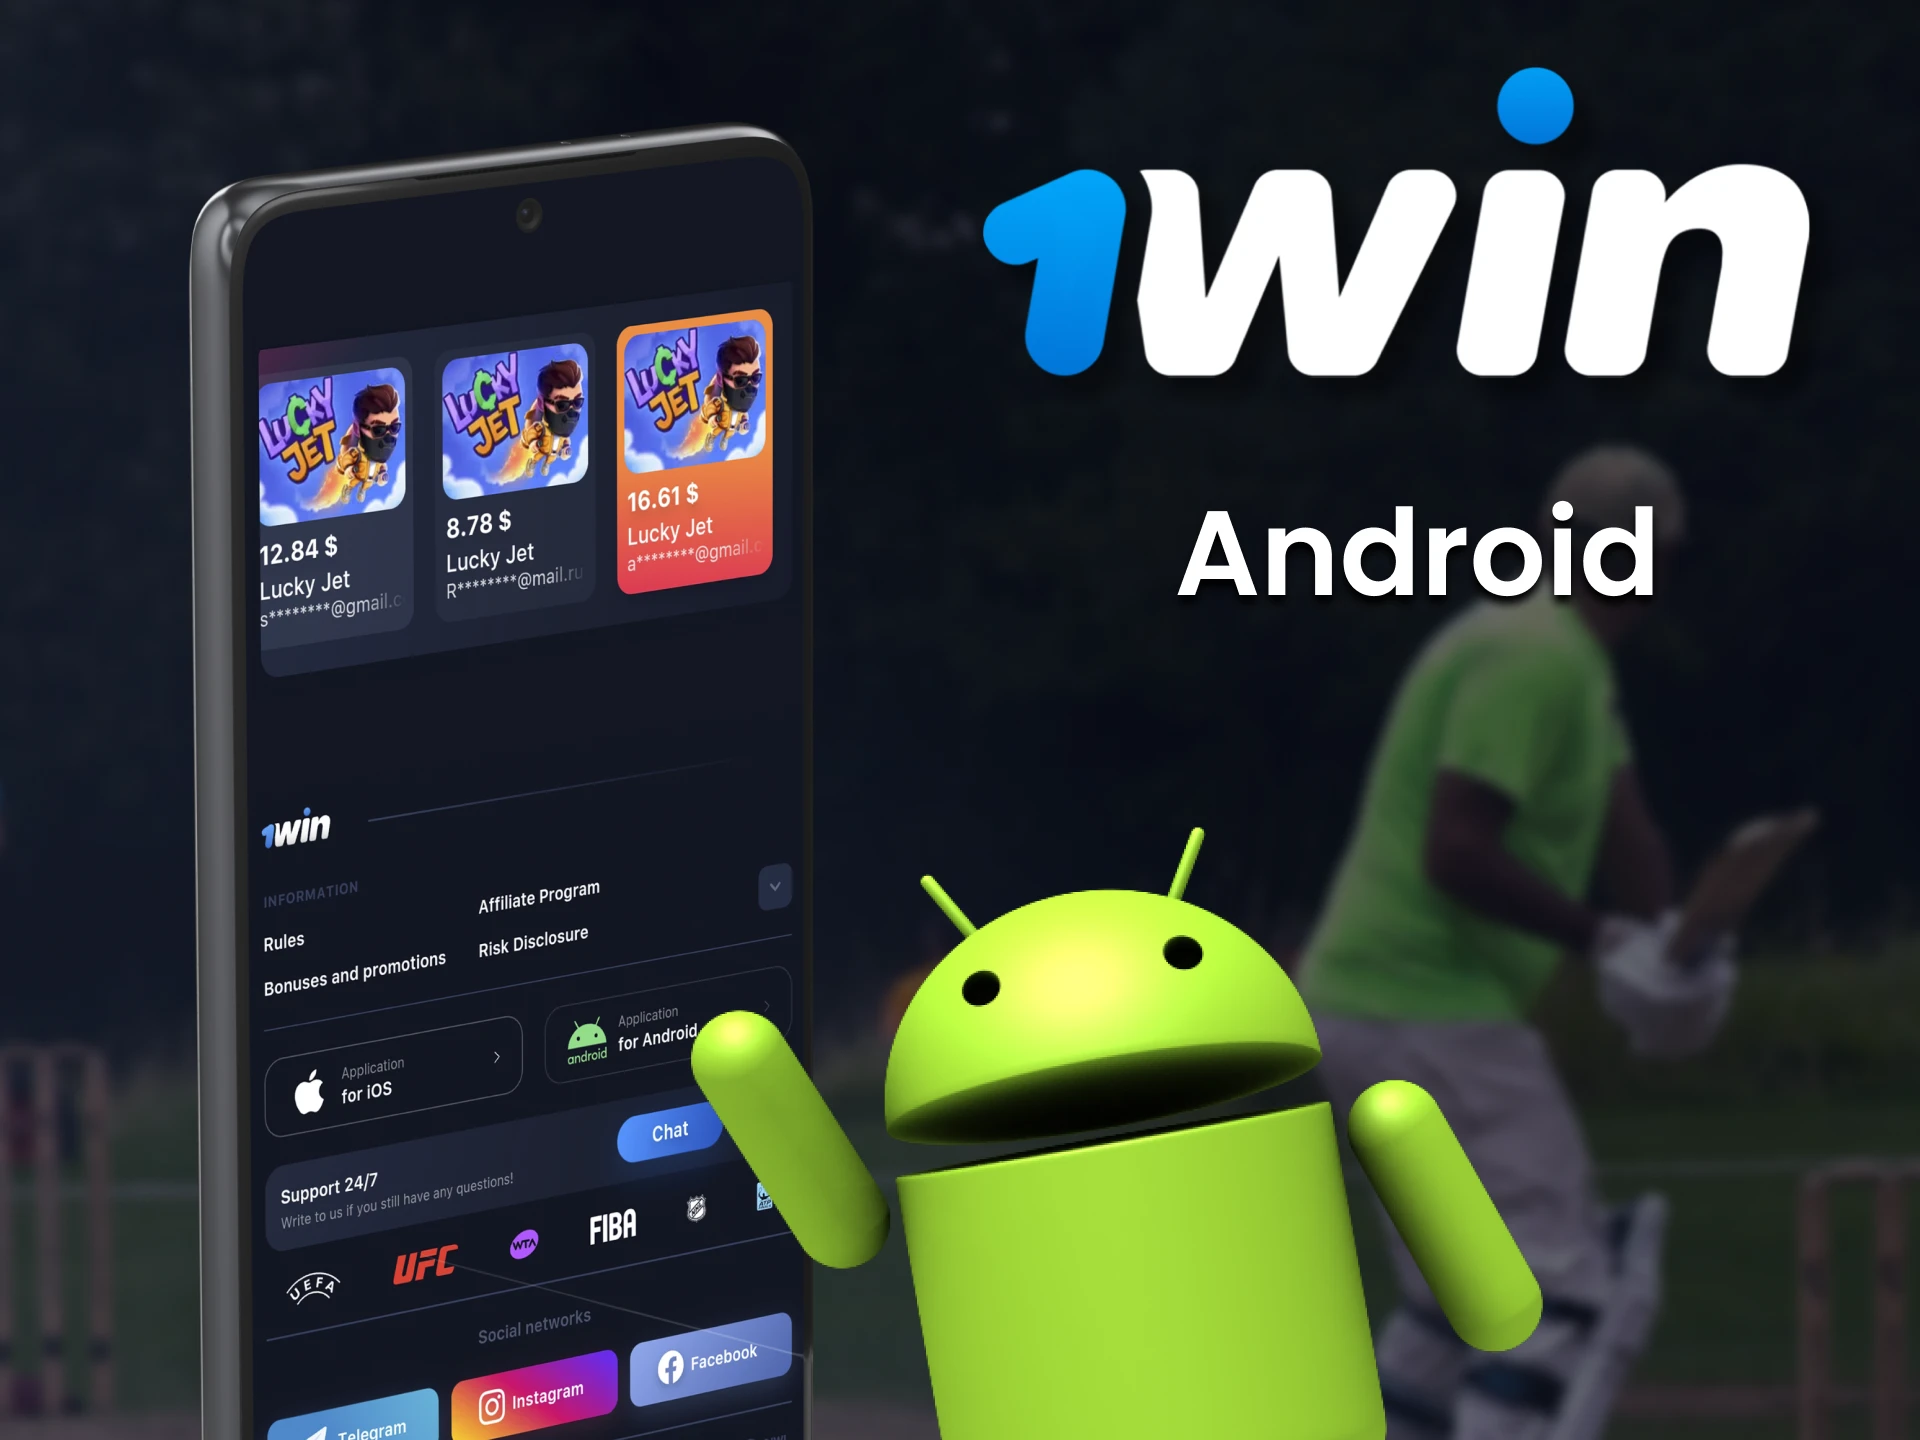 Download 1win APK on your Android device and install the app.